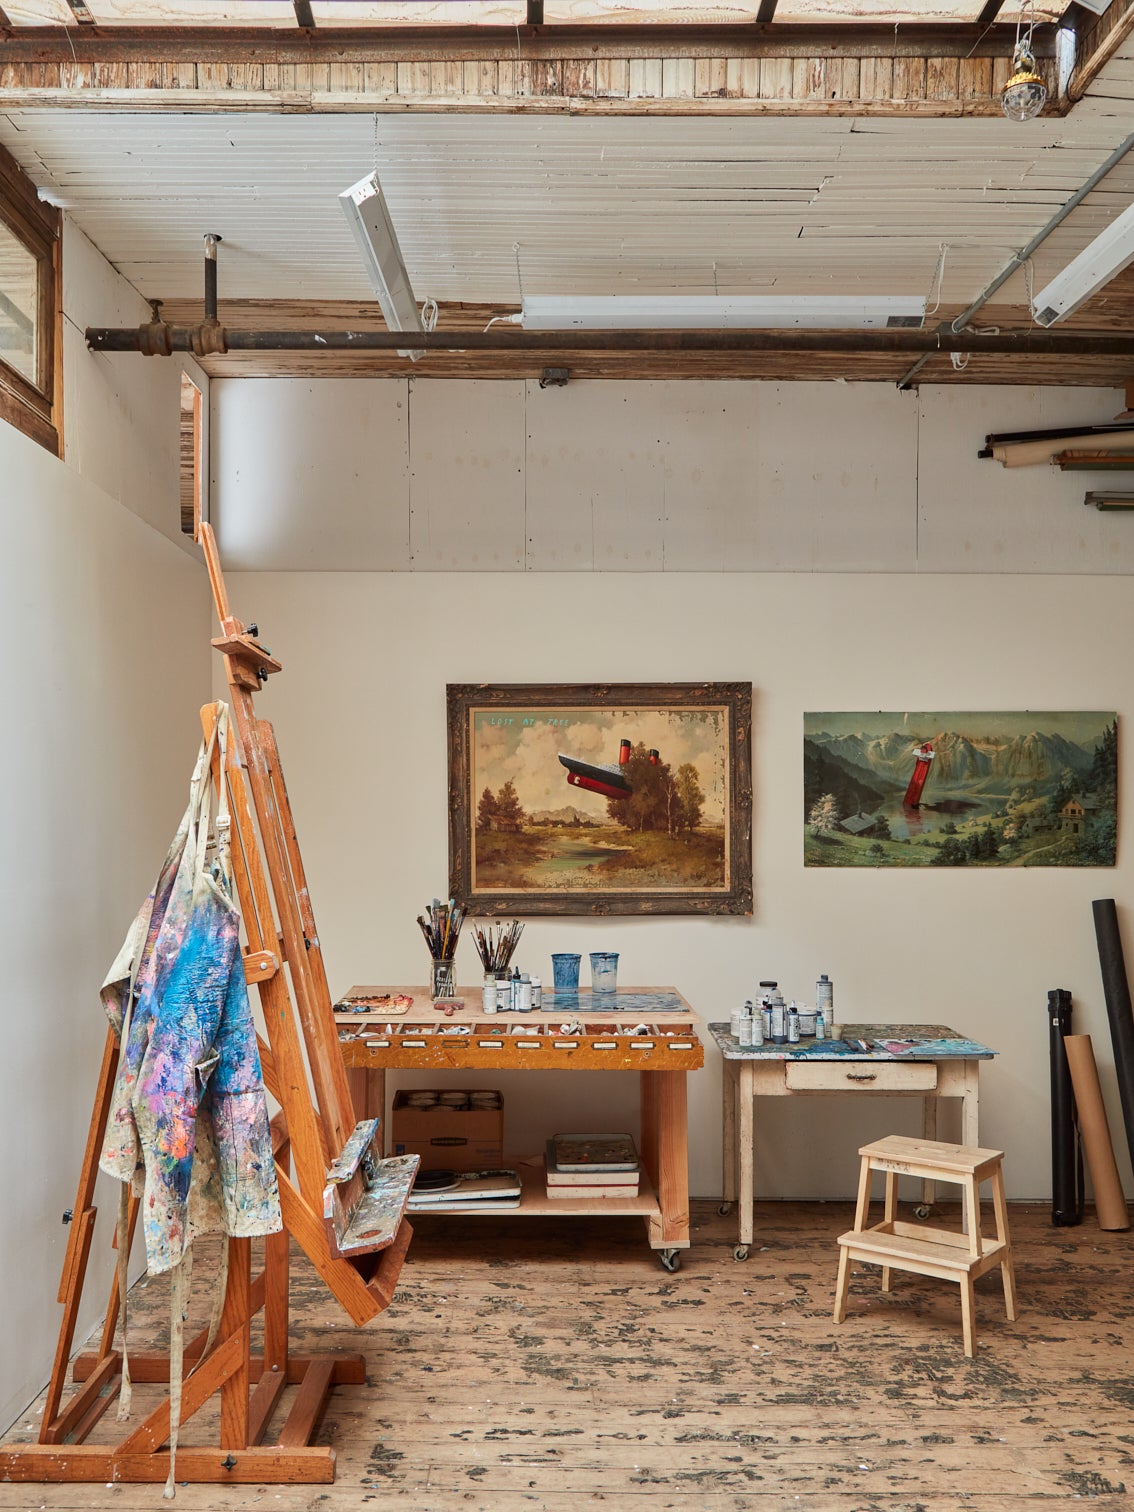 Artist's studio with white walls and wooden beams. An unfinished painting is propped up to the right. Two paintings are hung on the back wall above two desks and a white stool.